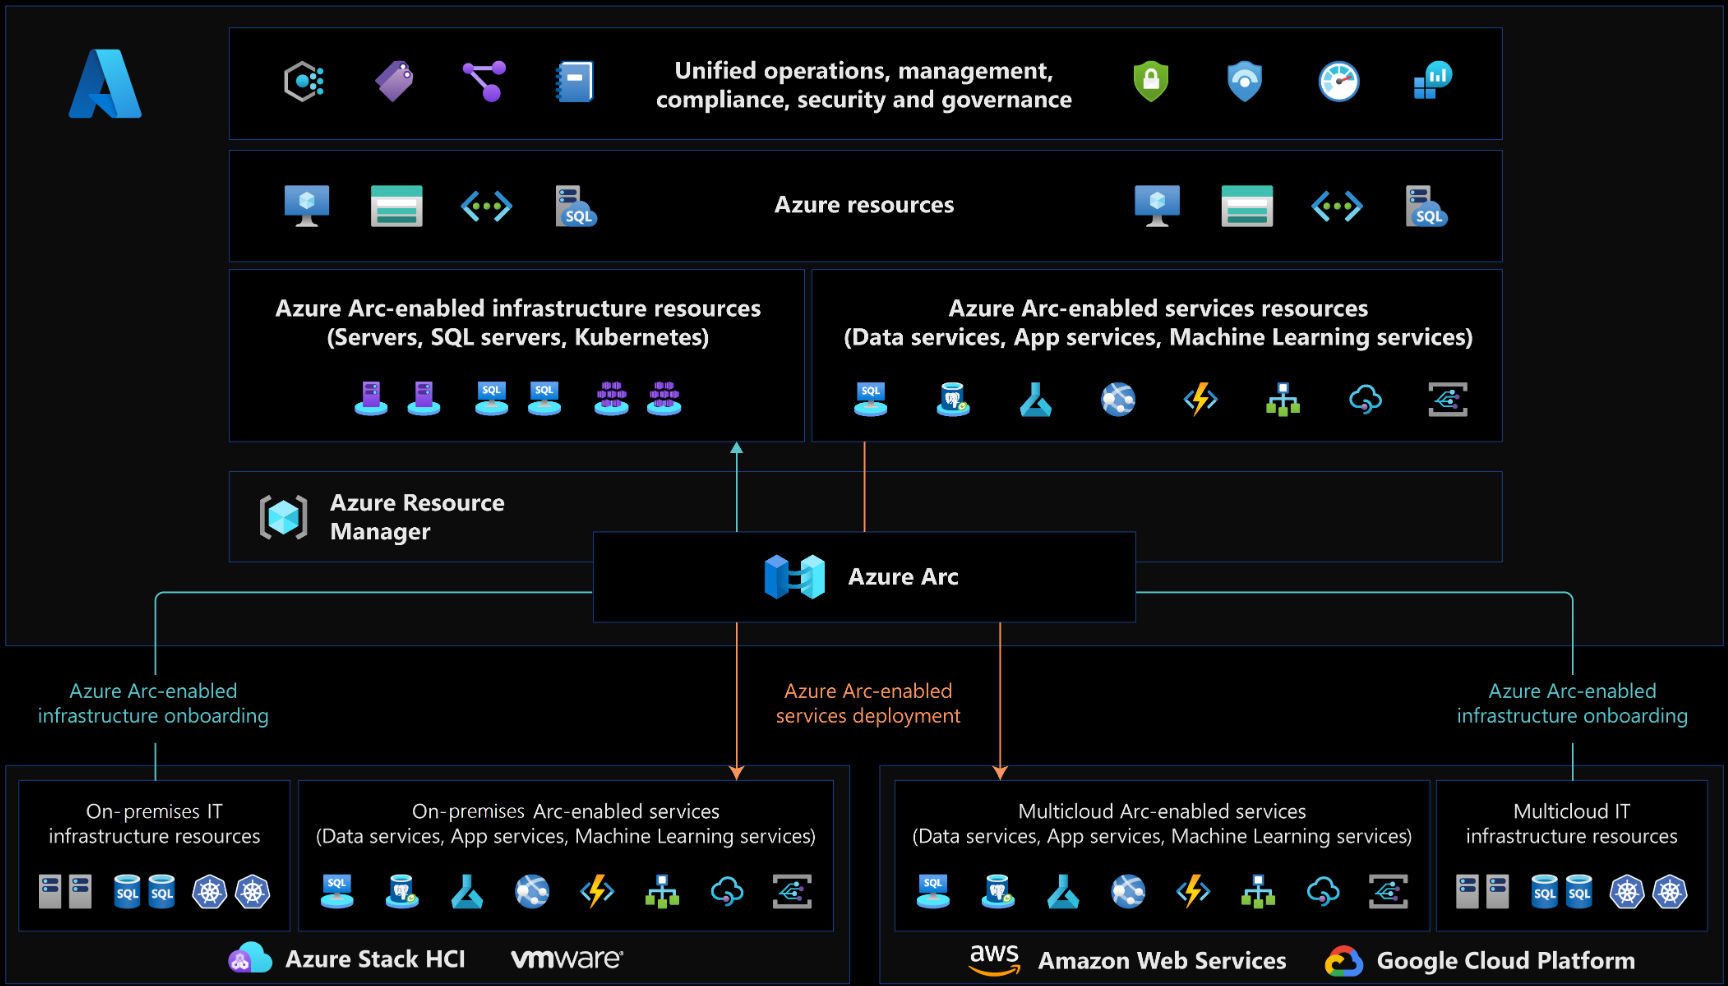 Microsoft Azure Arc provides an entire suite of tools to manage resources across your hybrid clouds